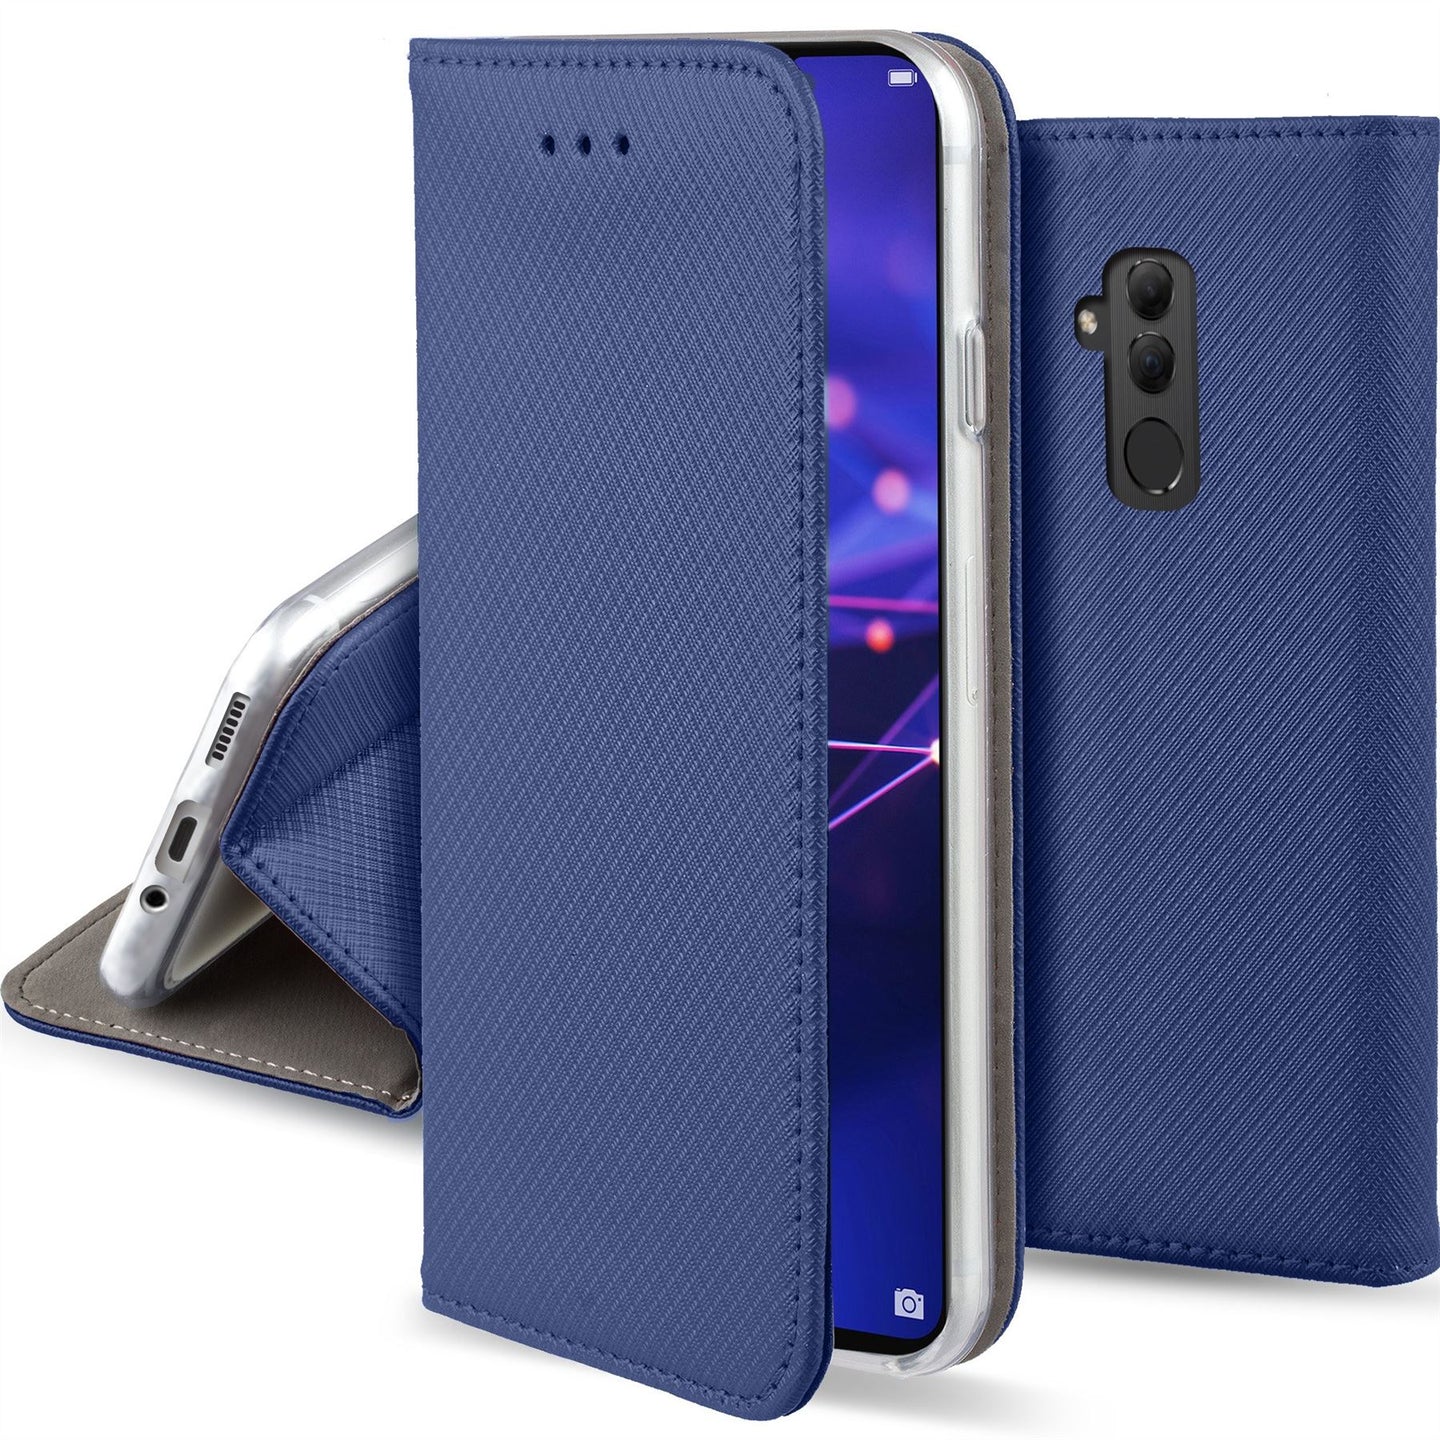 Moozy Case Flip Cover for Huawei Mate 20 Lite, Dark Blue - Smart Magnetic Flip Case with Card Holder and Stand